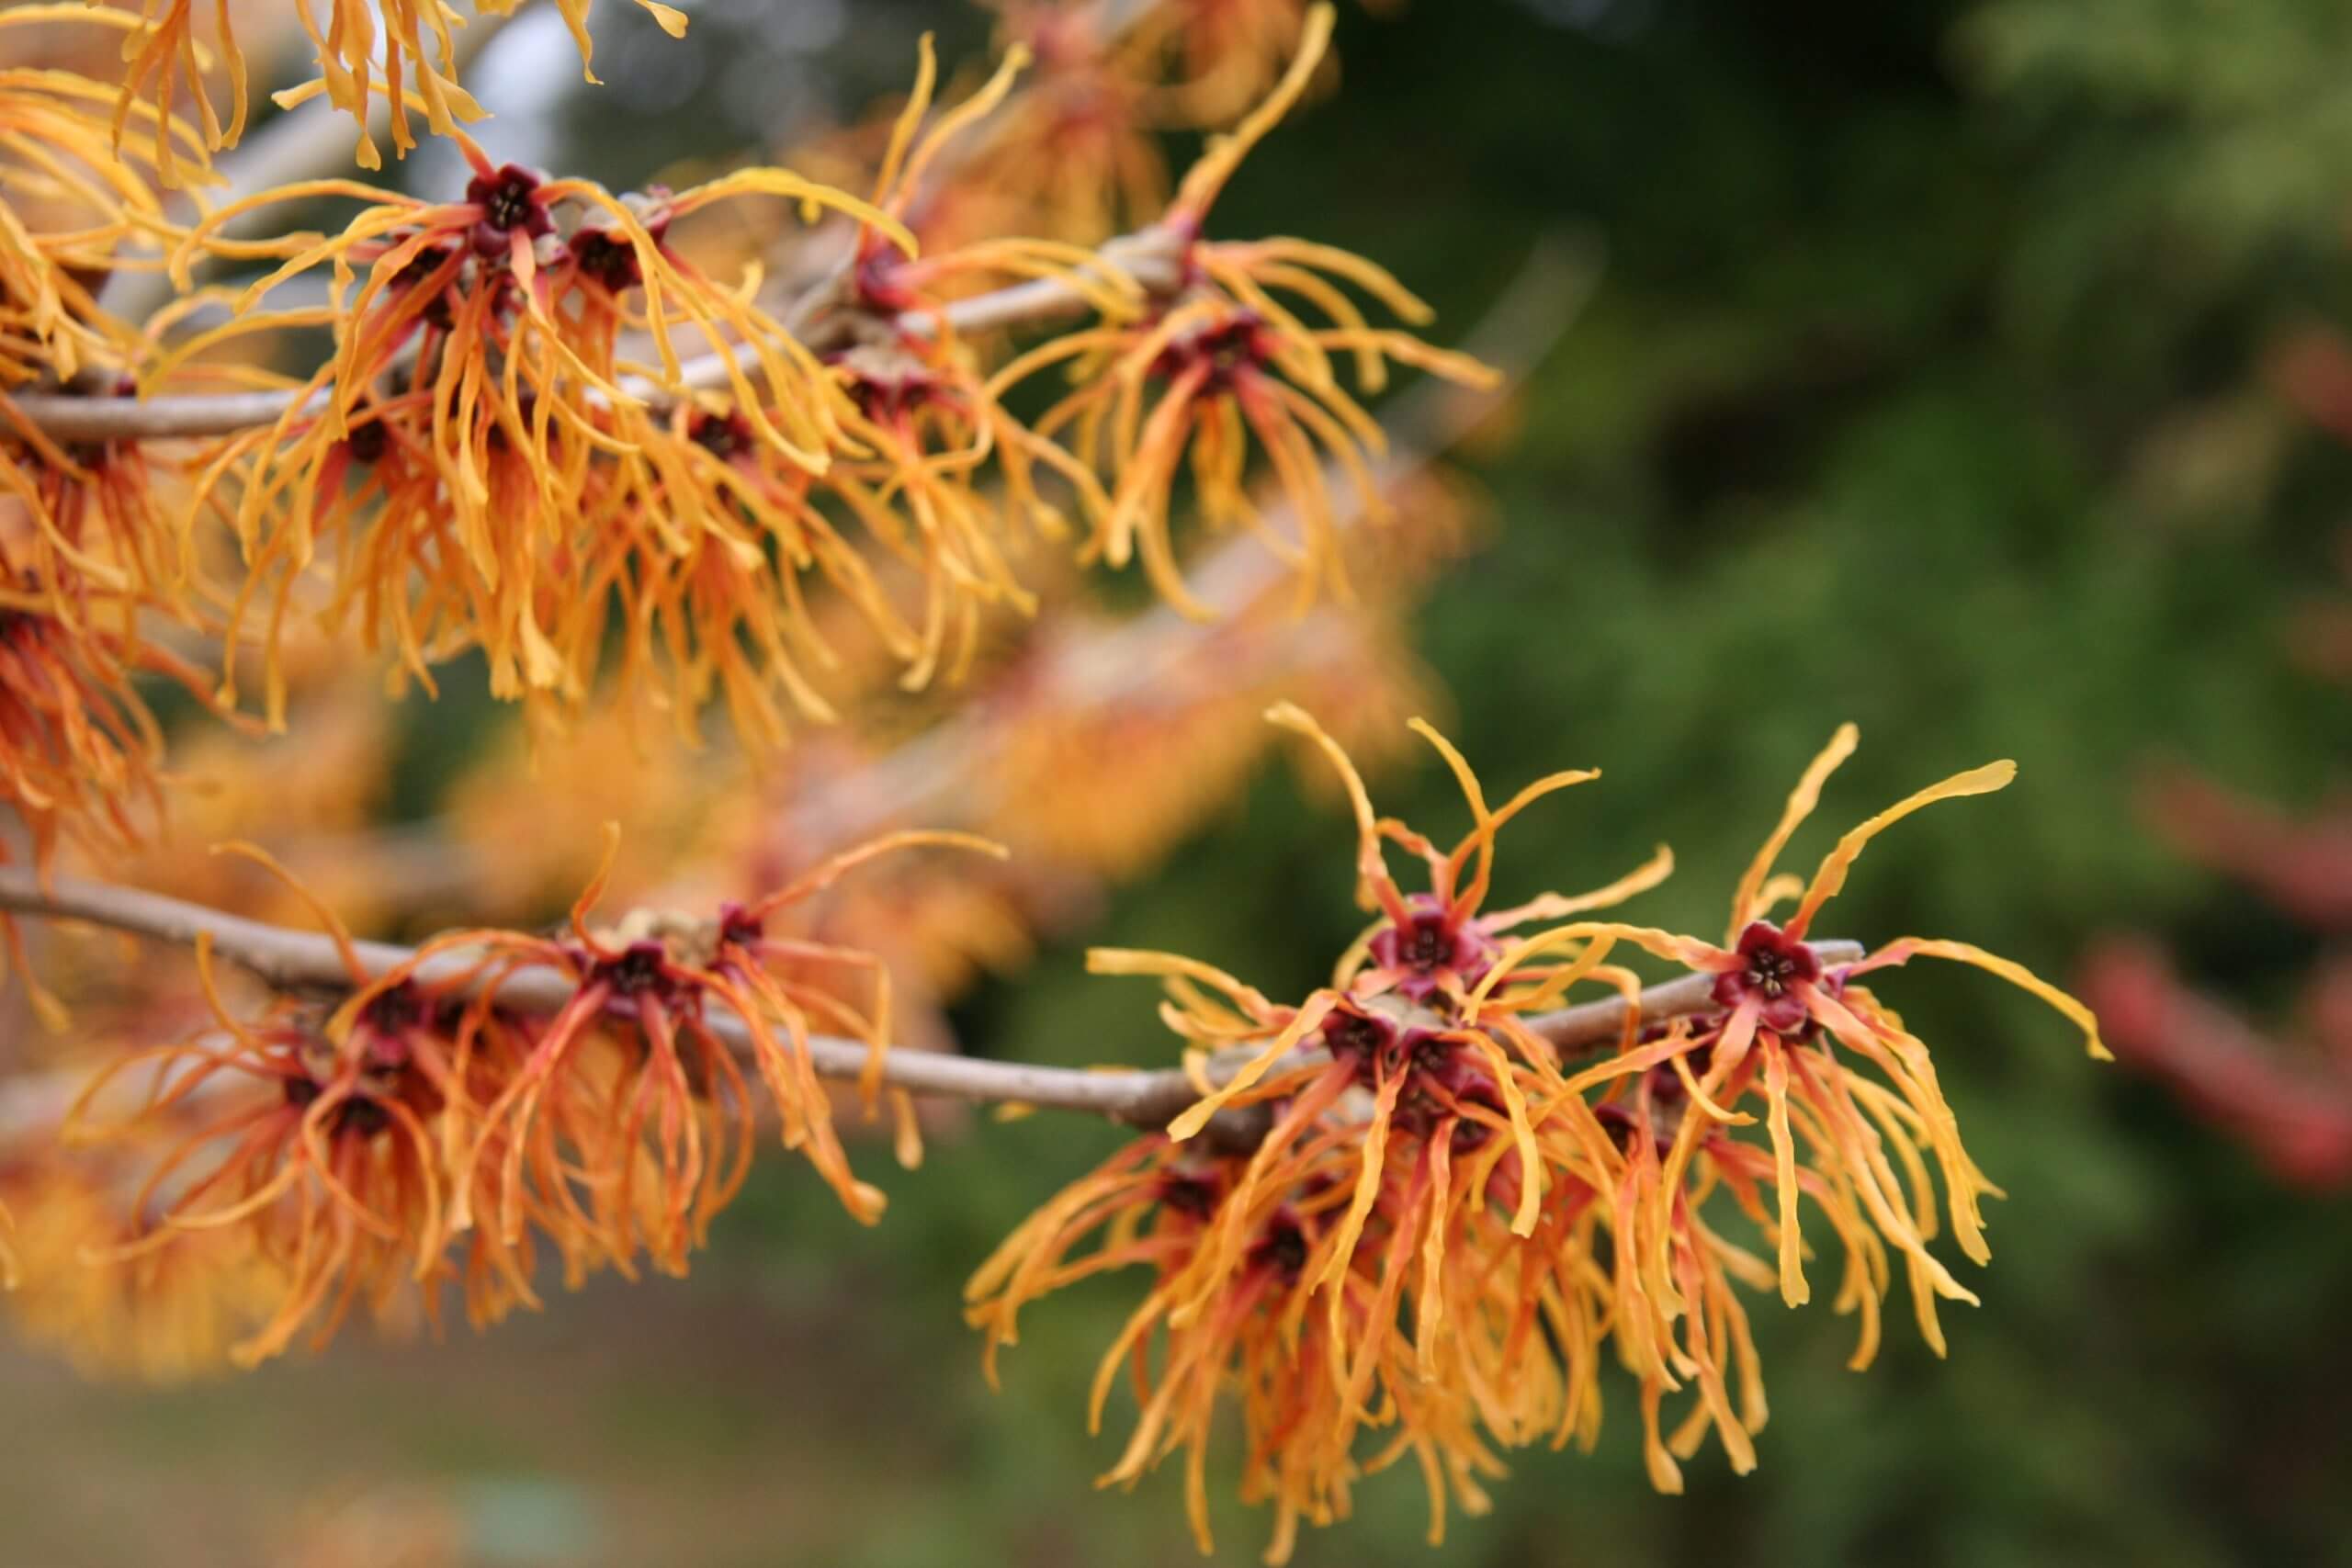 The coppery flowers of Hamamelis x intermedia 'Jelena' are very fragrant and pretty. (image by Jessie Keith)